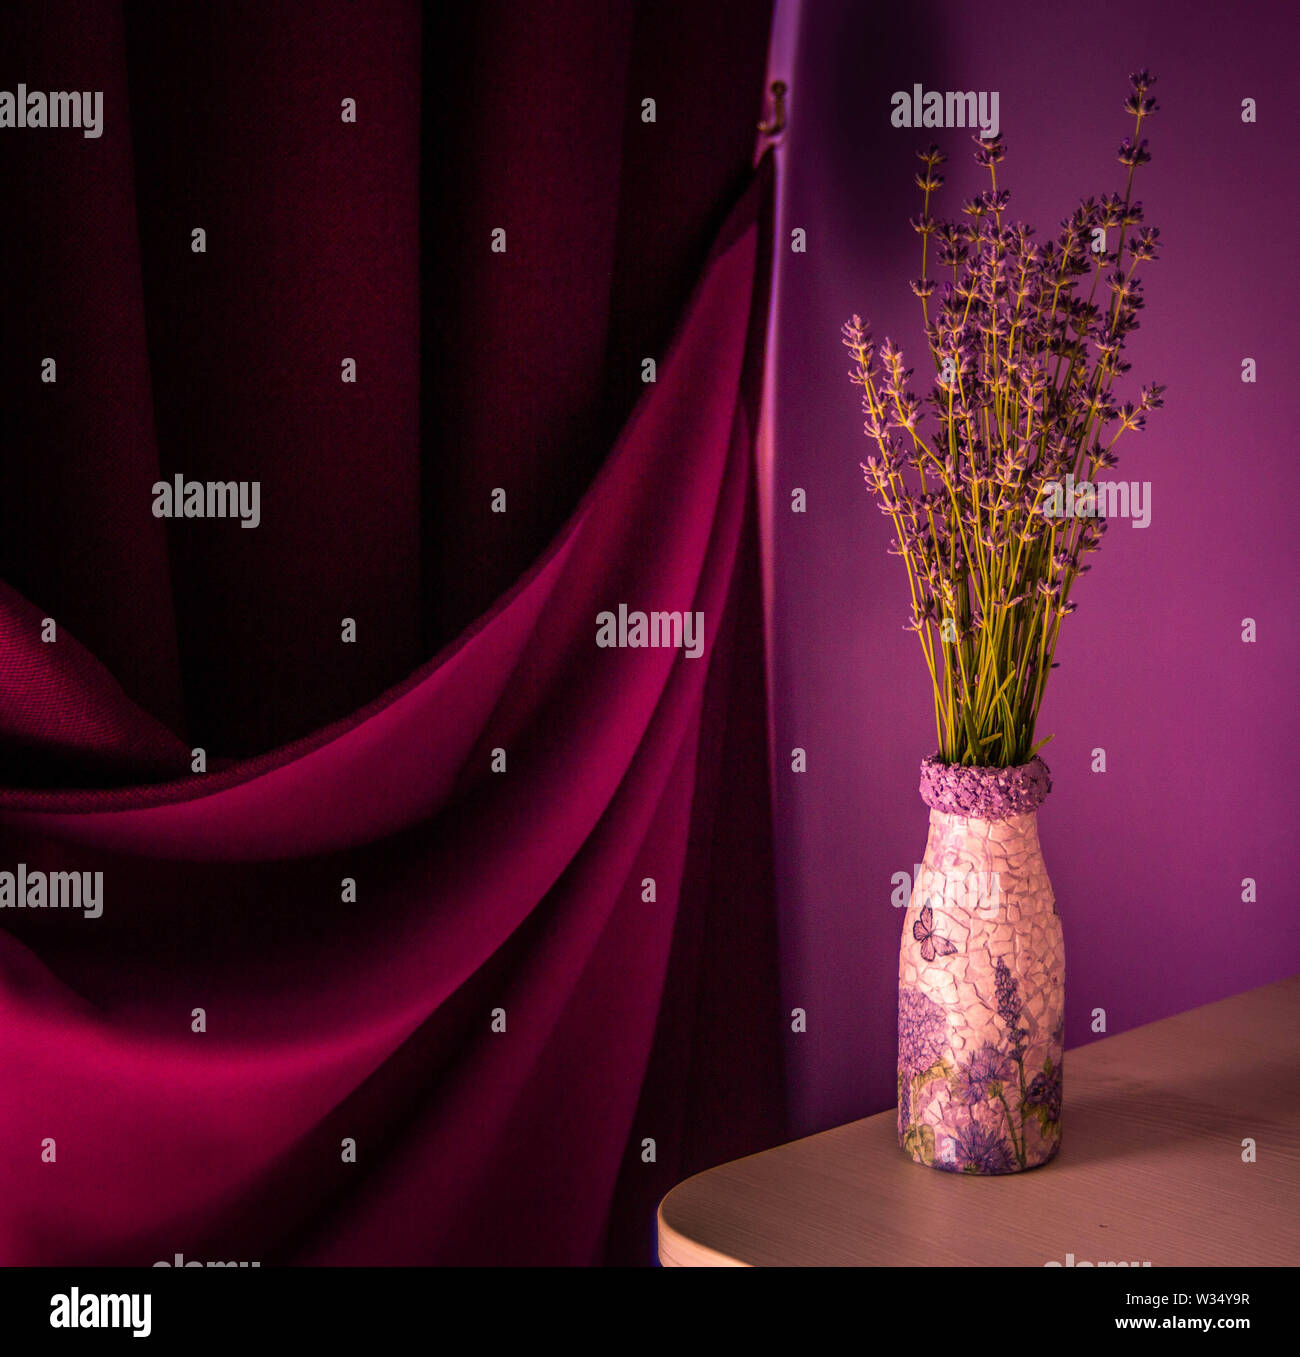 Lavender in the vase  on the table. Purple curtain and violet wall background. Stock Photo